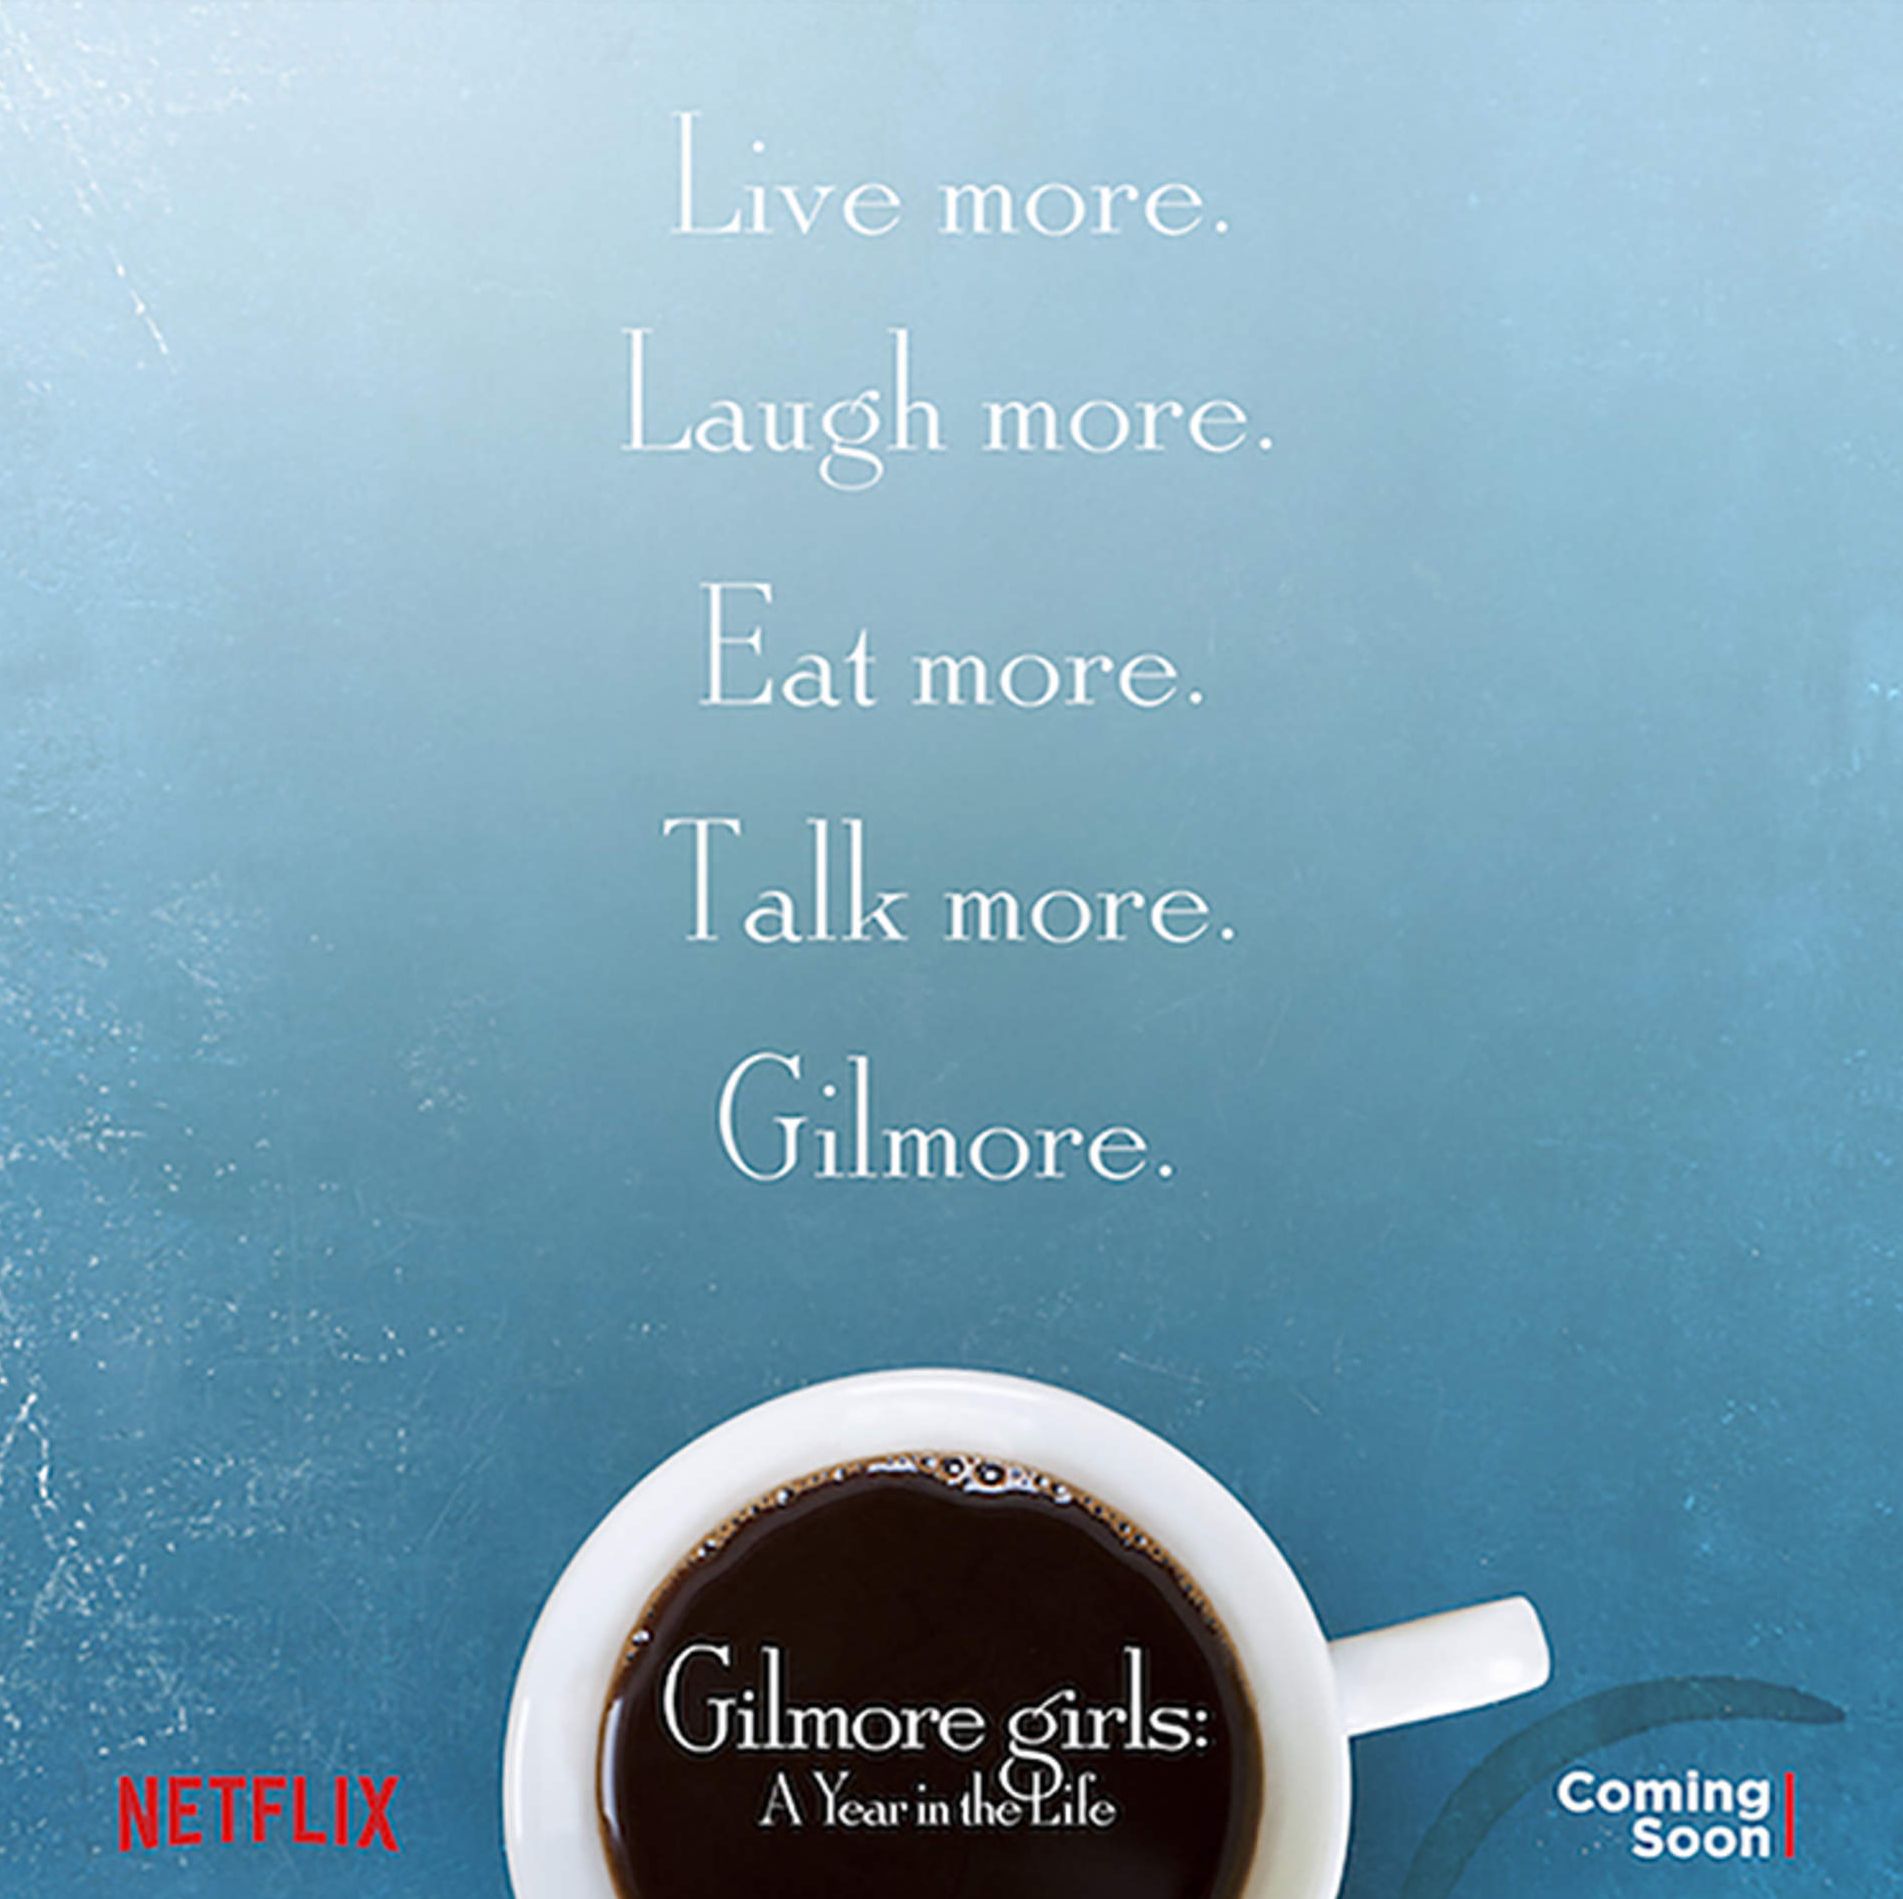 New poster and title for the &#039;Gilmore Girls&#039; revival